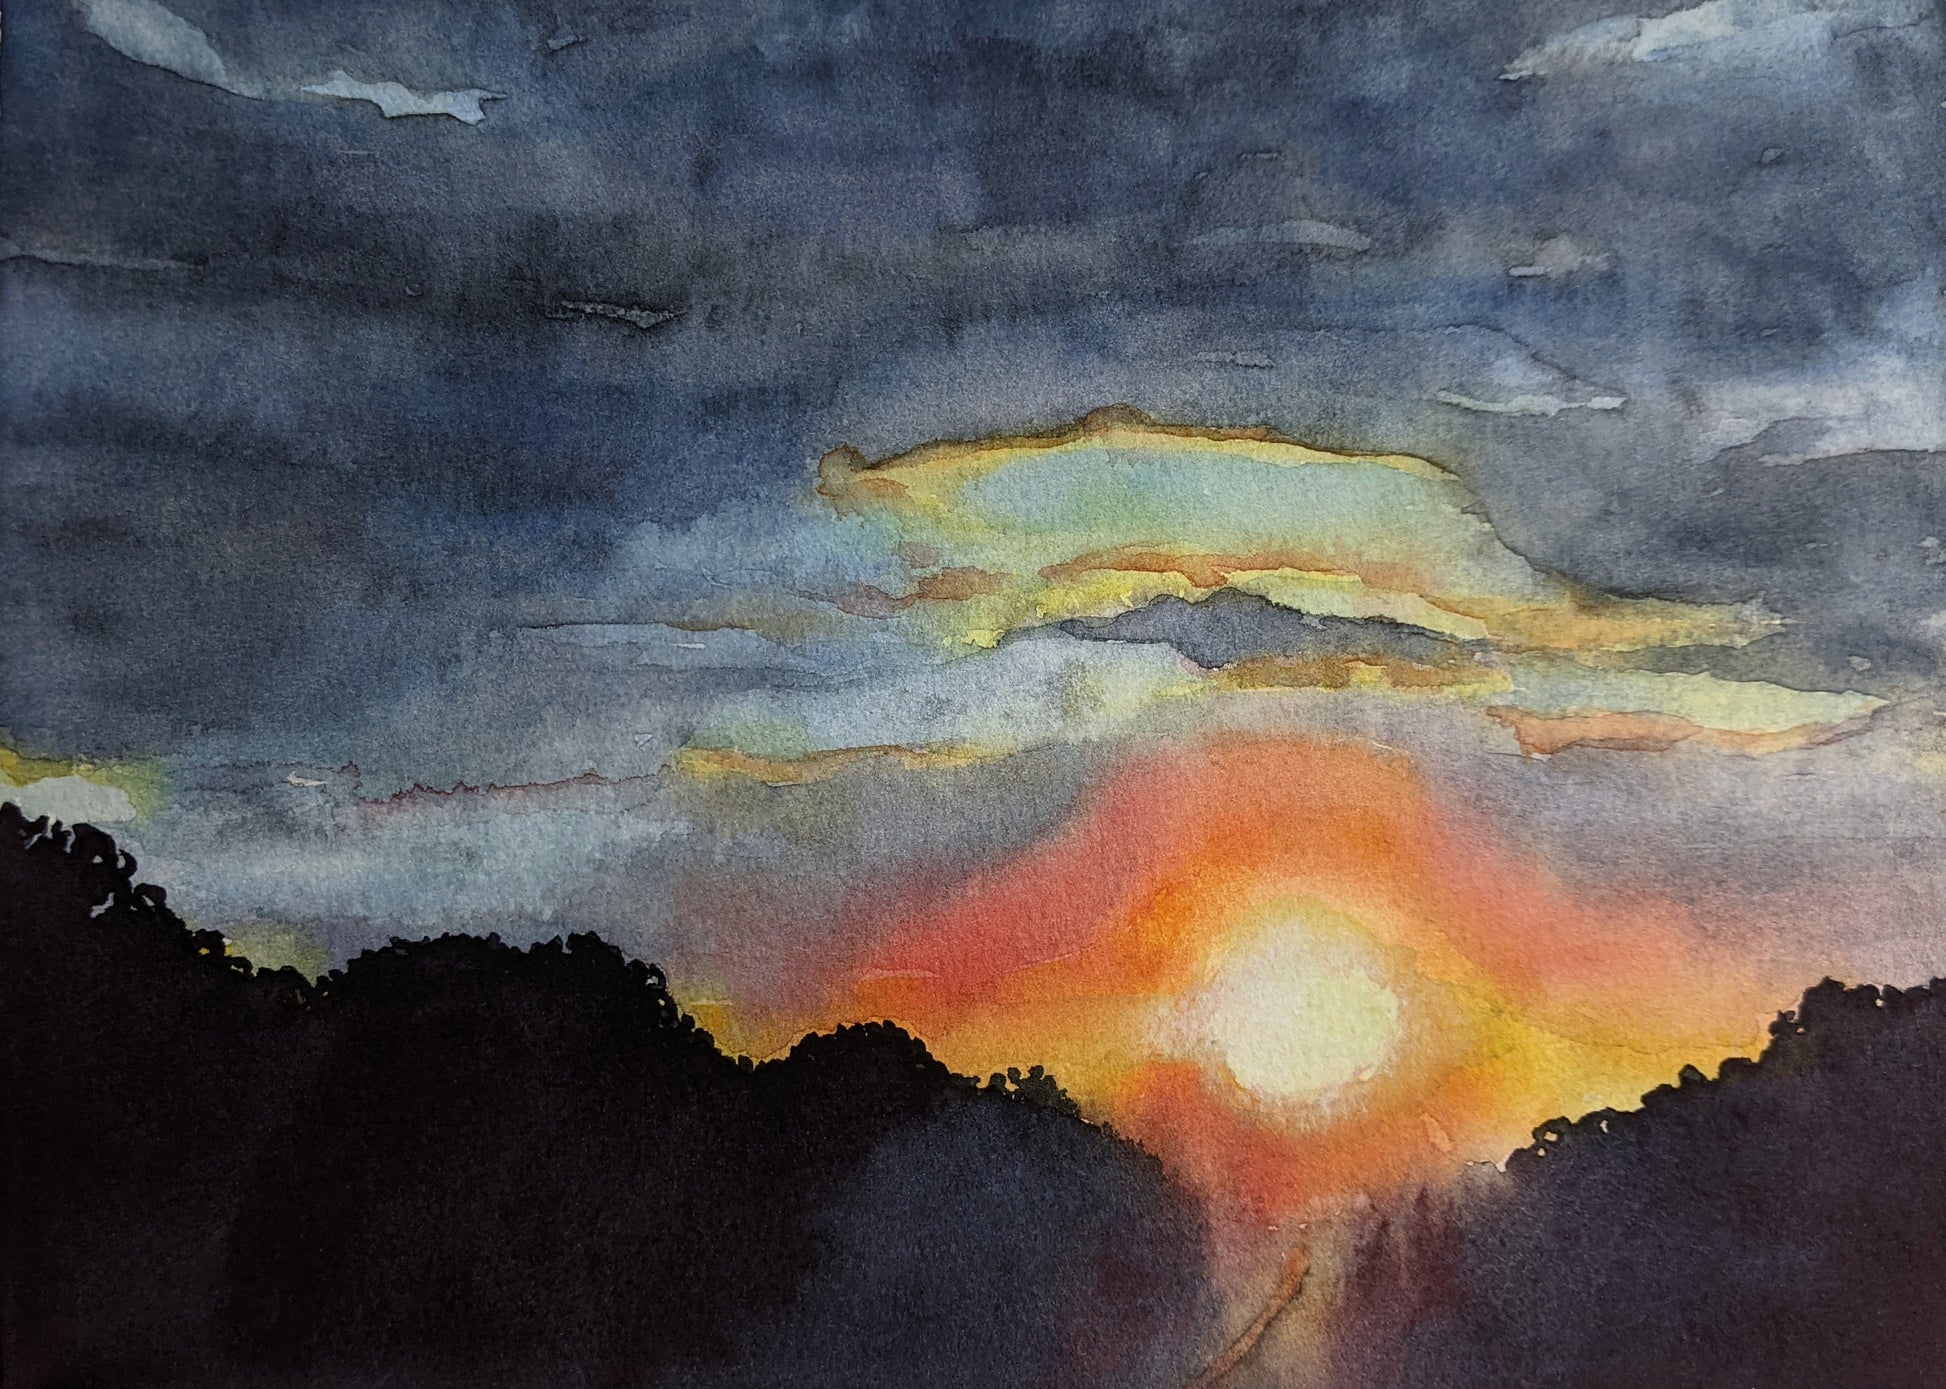 Sunset Glow, watercolor painting on paper